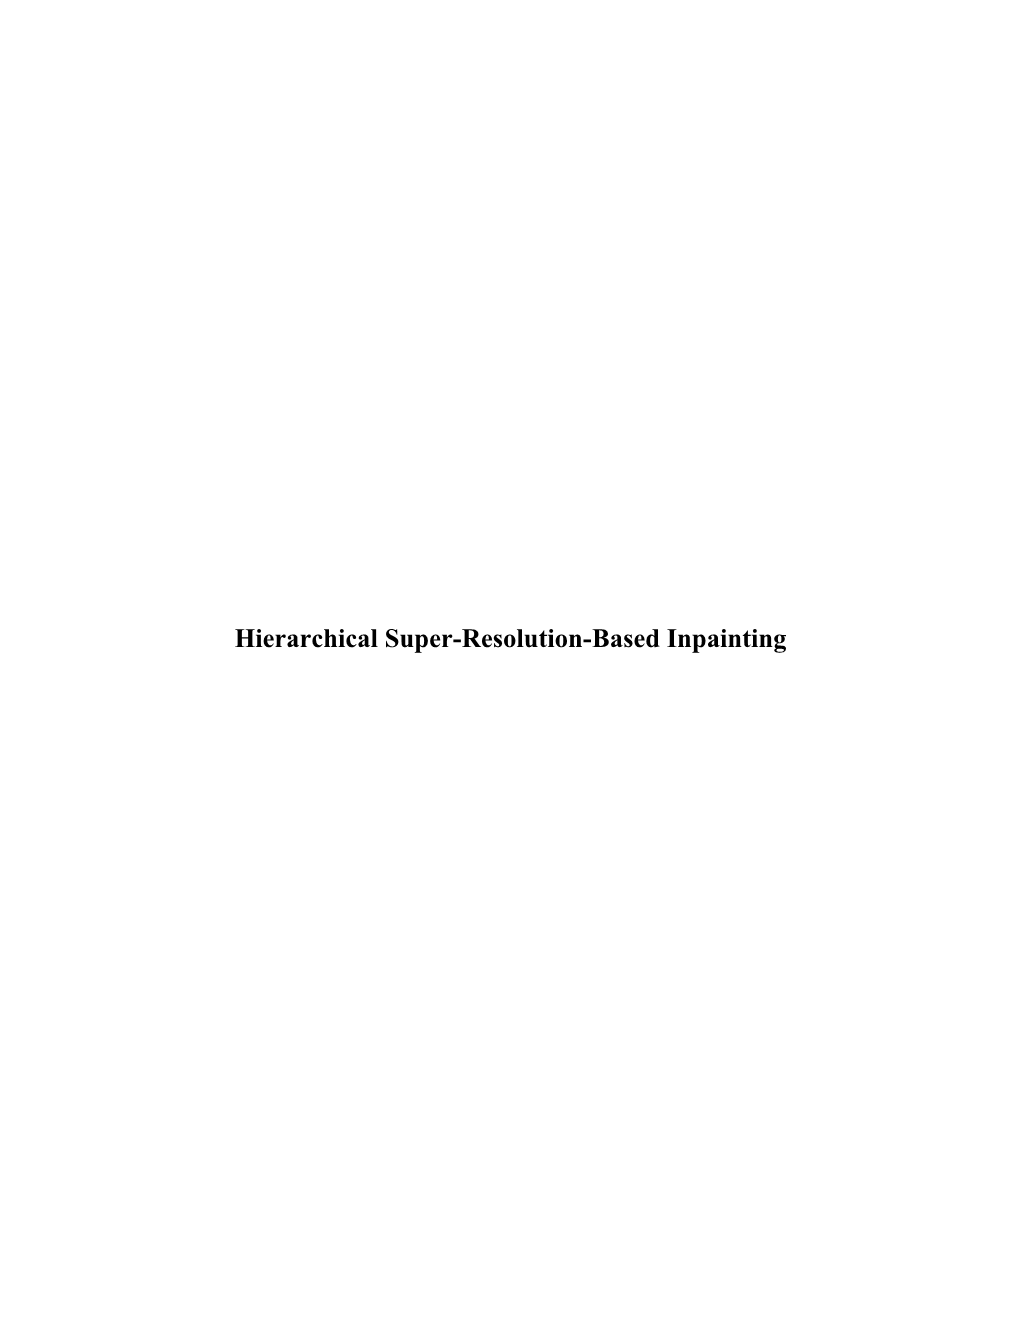 Hierarchical Super-Resolution-Based Inpainting